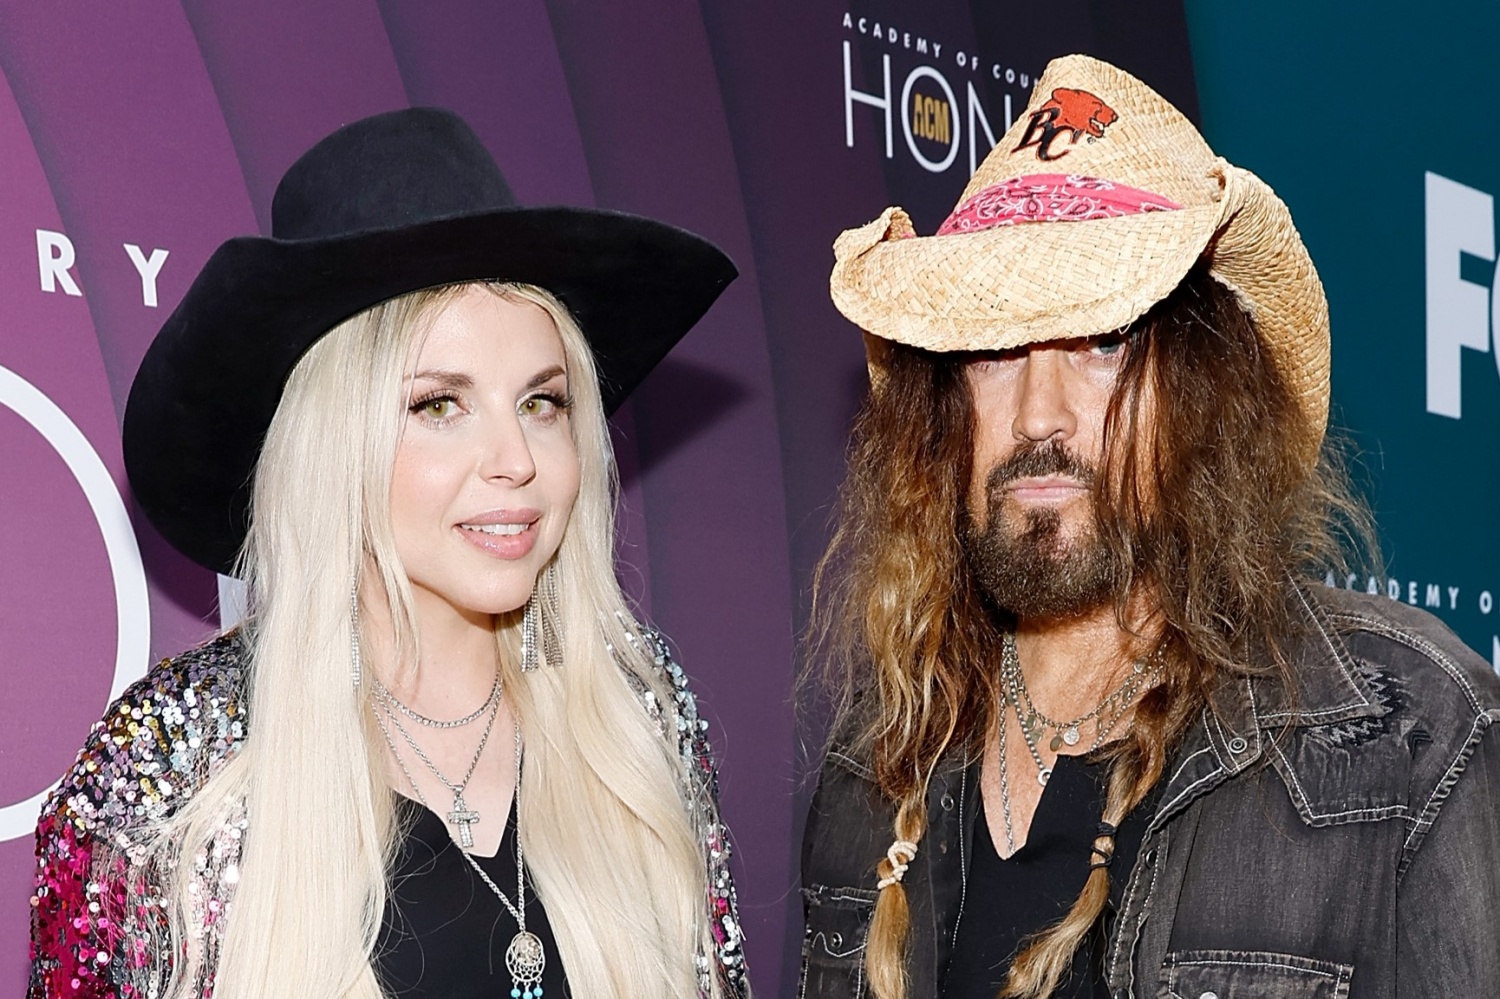 Firerose a ‘Gold Digger?’  Billy Ray Cyrus just got used to their marriage, insiders say: Report